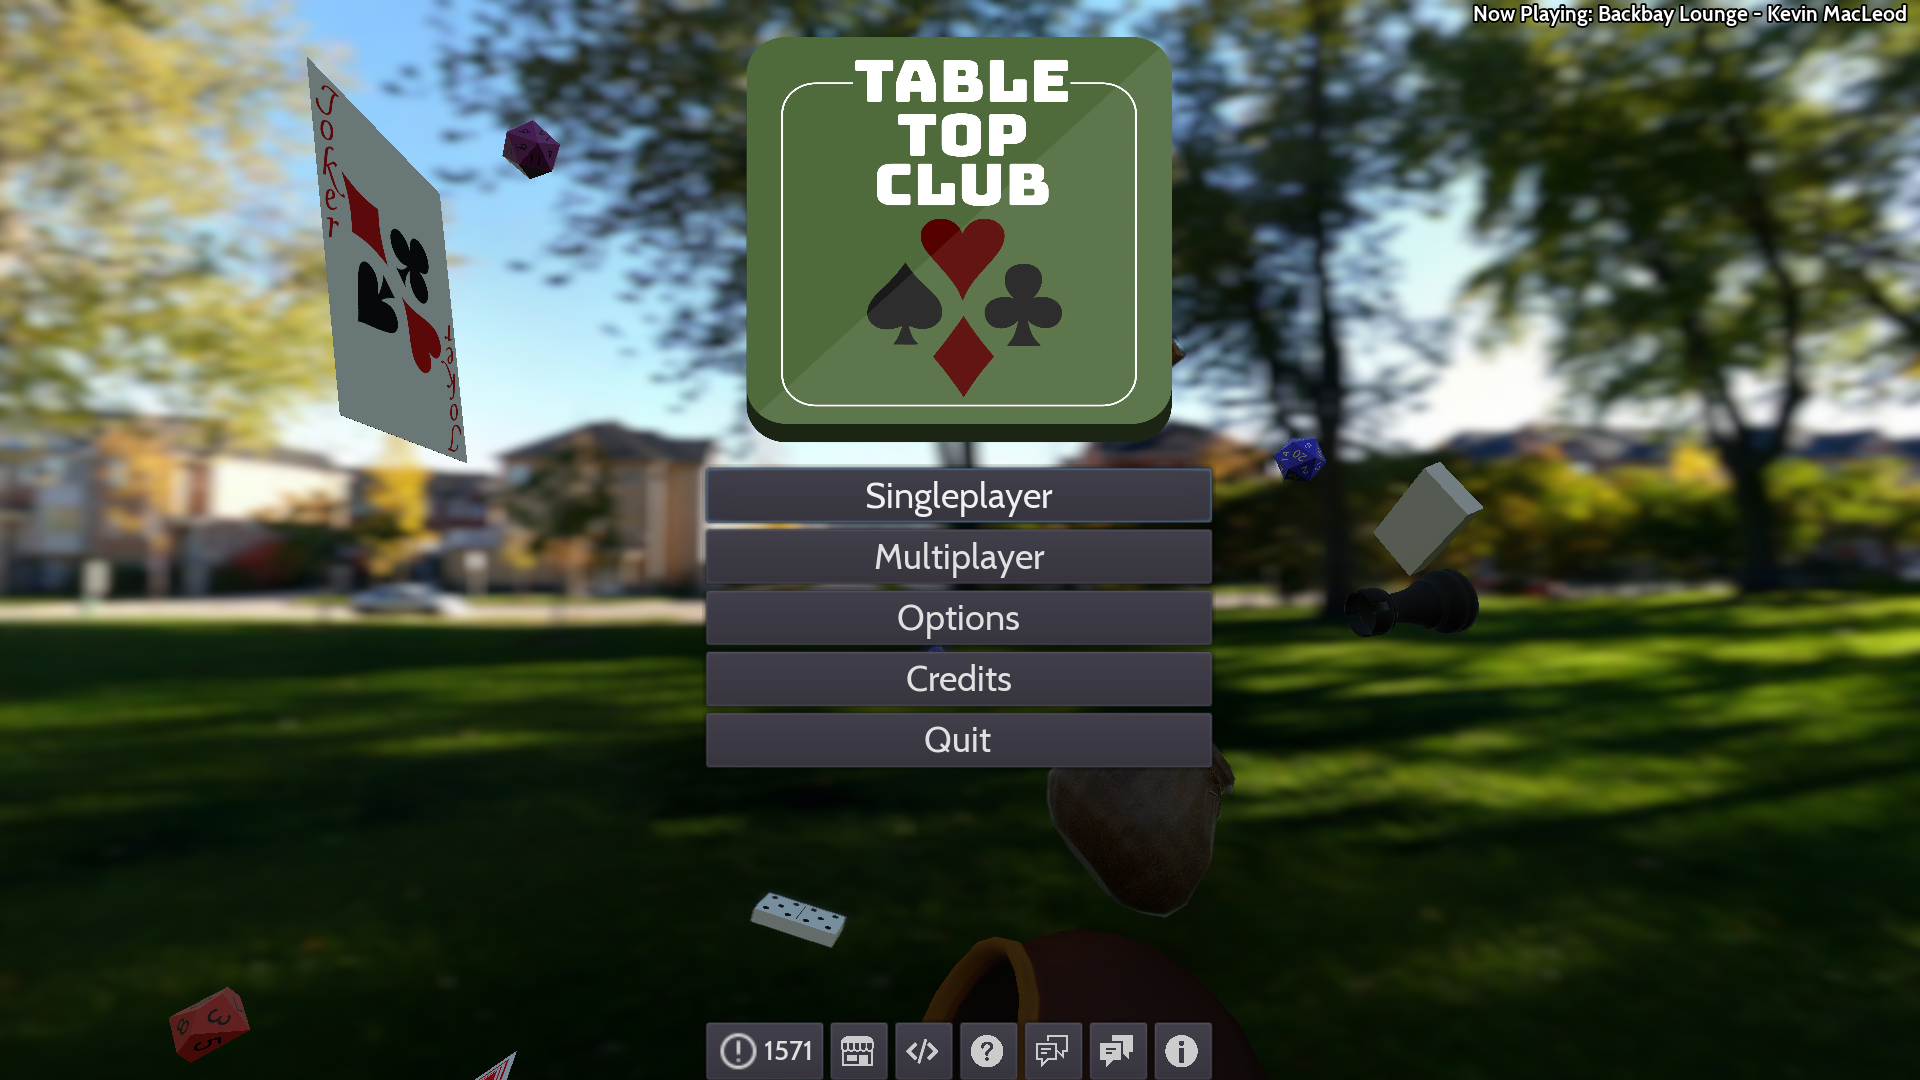 A screenshot of the main menu from the current version of the game. In the background is a park surrounded by houses, with various board game pieces like cards and dice falling from the top. The Tabletop Club logo is at the top, with a series of buttons going down the centre of the screen. At the buttom are various icon-only buttons for miscellaneous purposes.